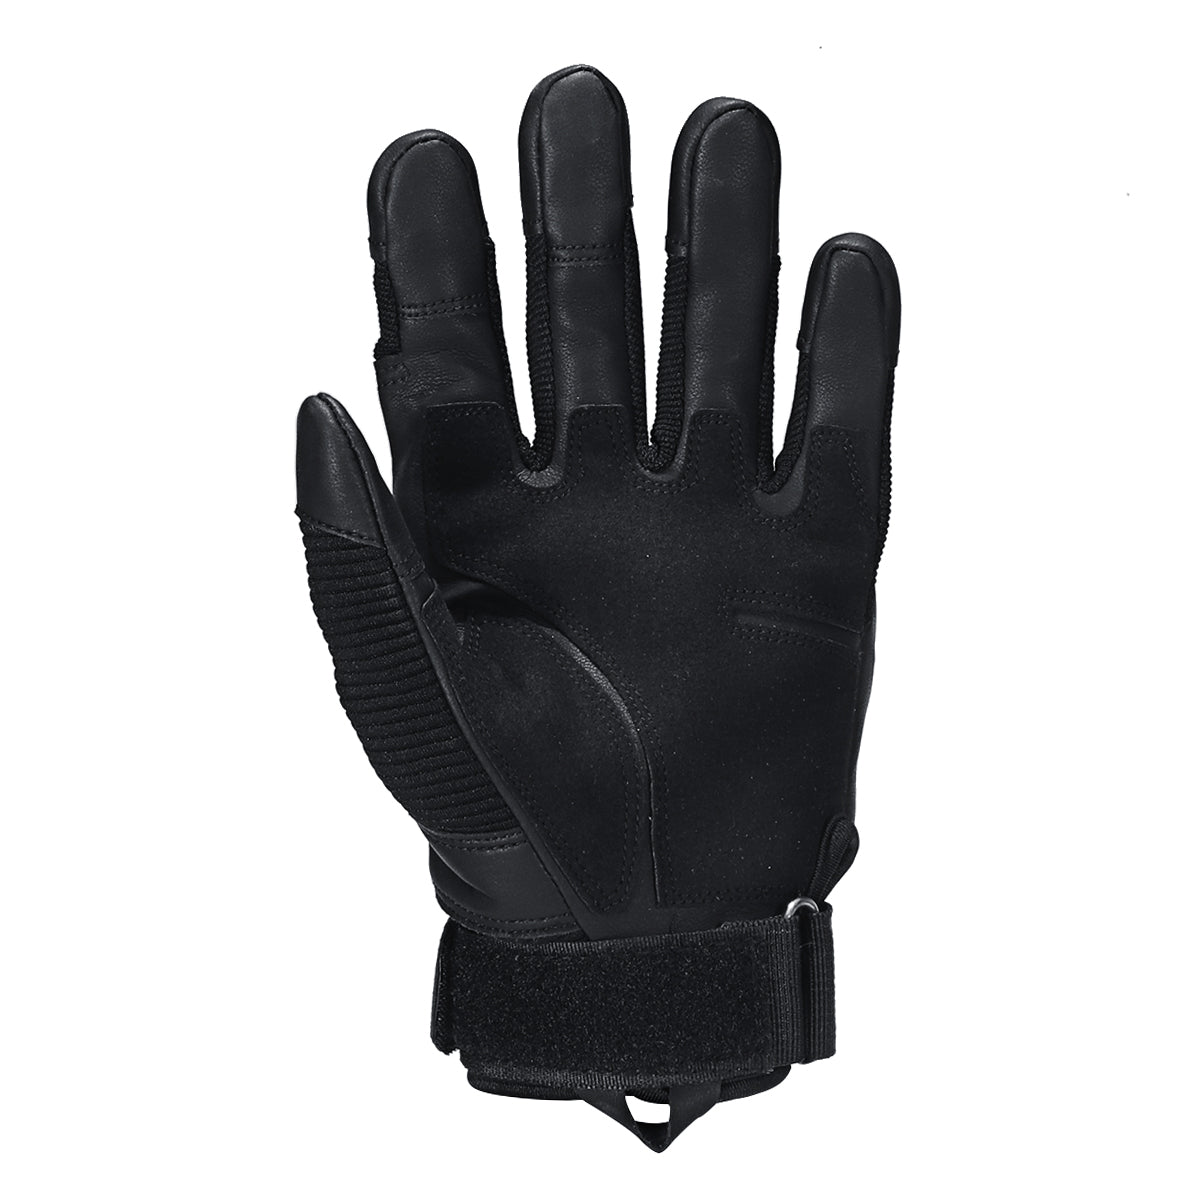 Black Touch Screen Motorcycle Full Finger Military Tactical Gloves Motorbike Driving